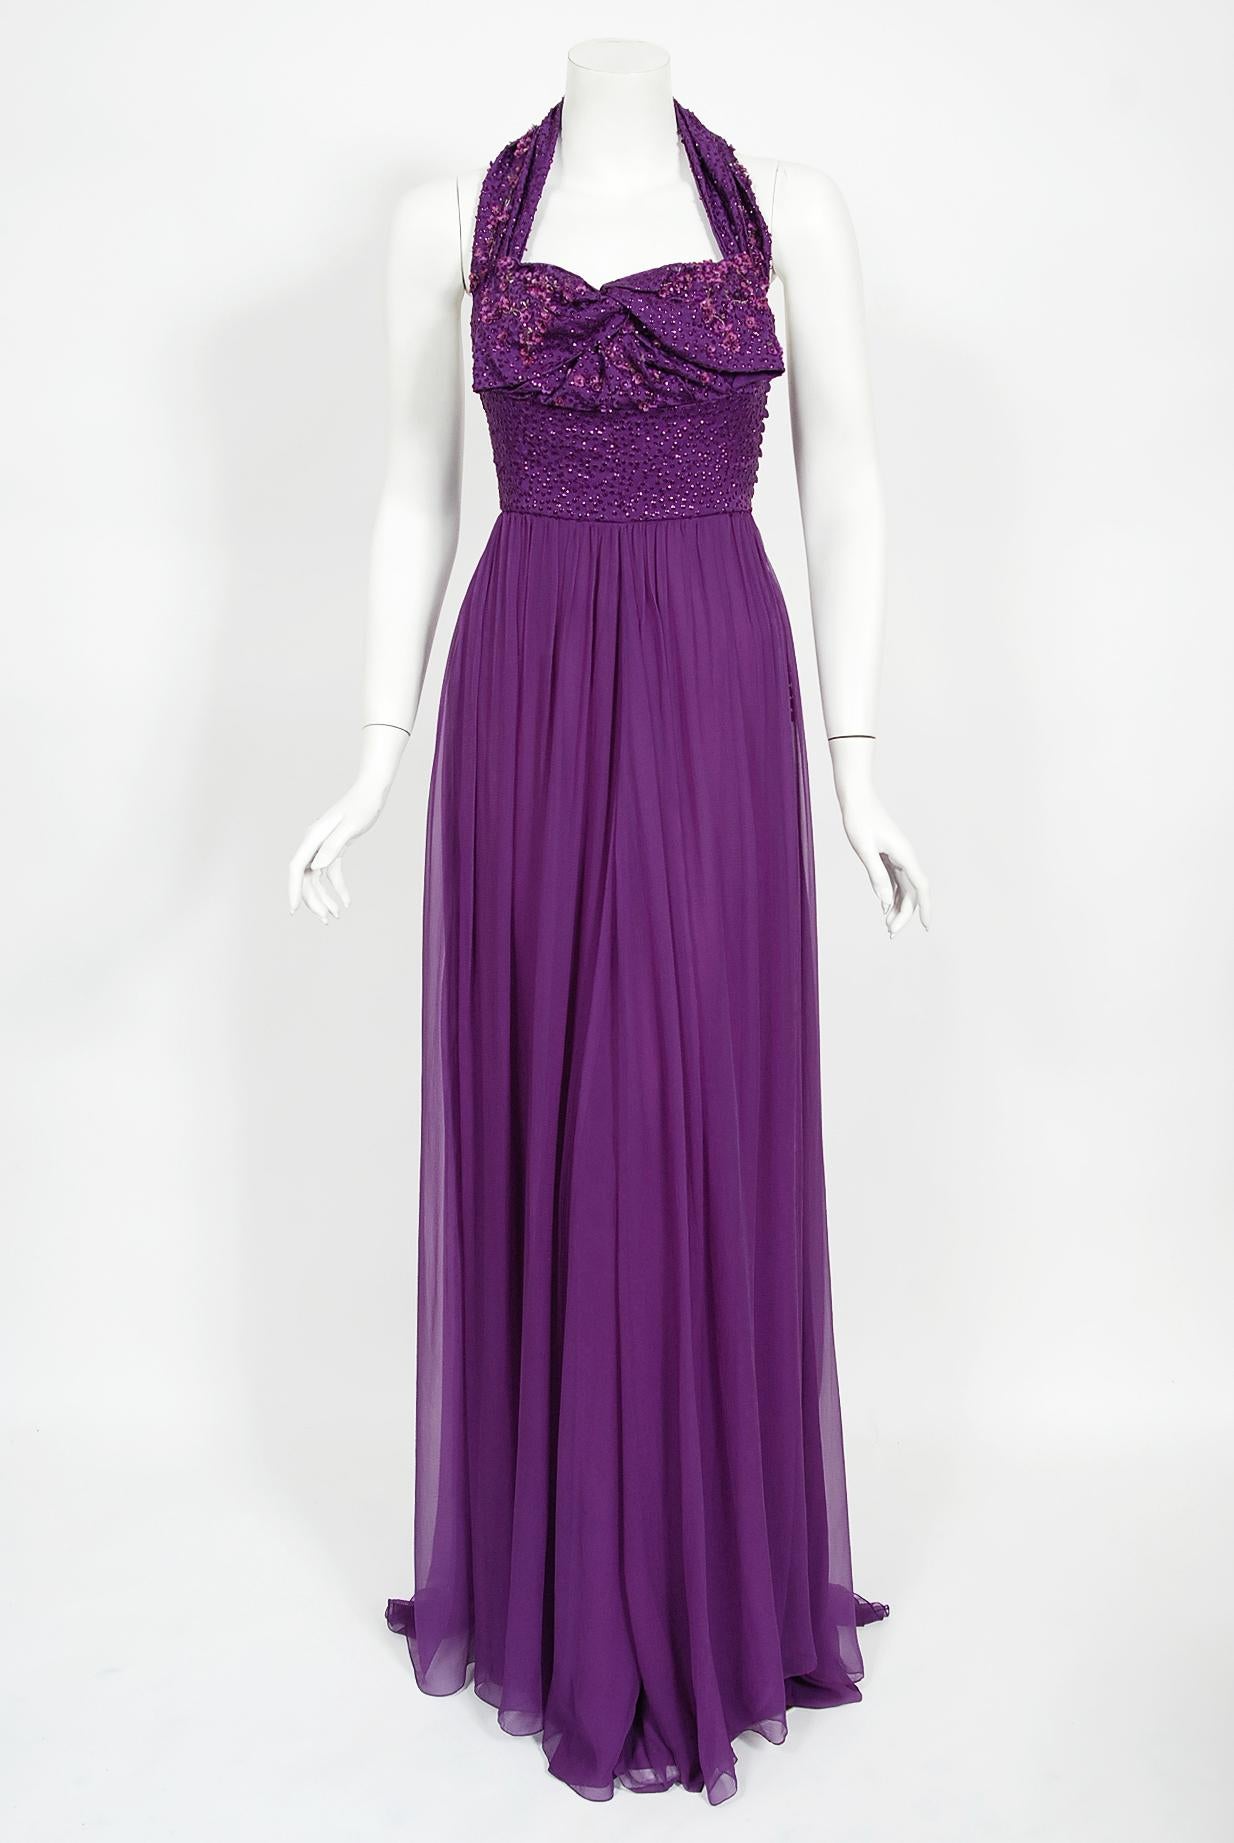 A simply stunning and totally timeless Christian Dior beaded, embroidered purple silk gown from John Galliano's 2009 spring-summer collection. John Galliano is widely considered one of the most innovative and influential fashion designers of the